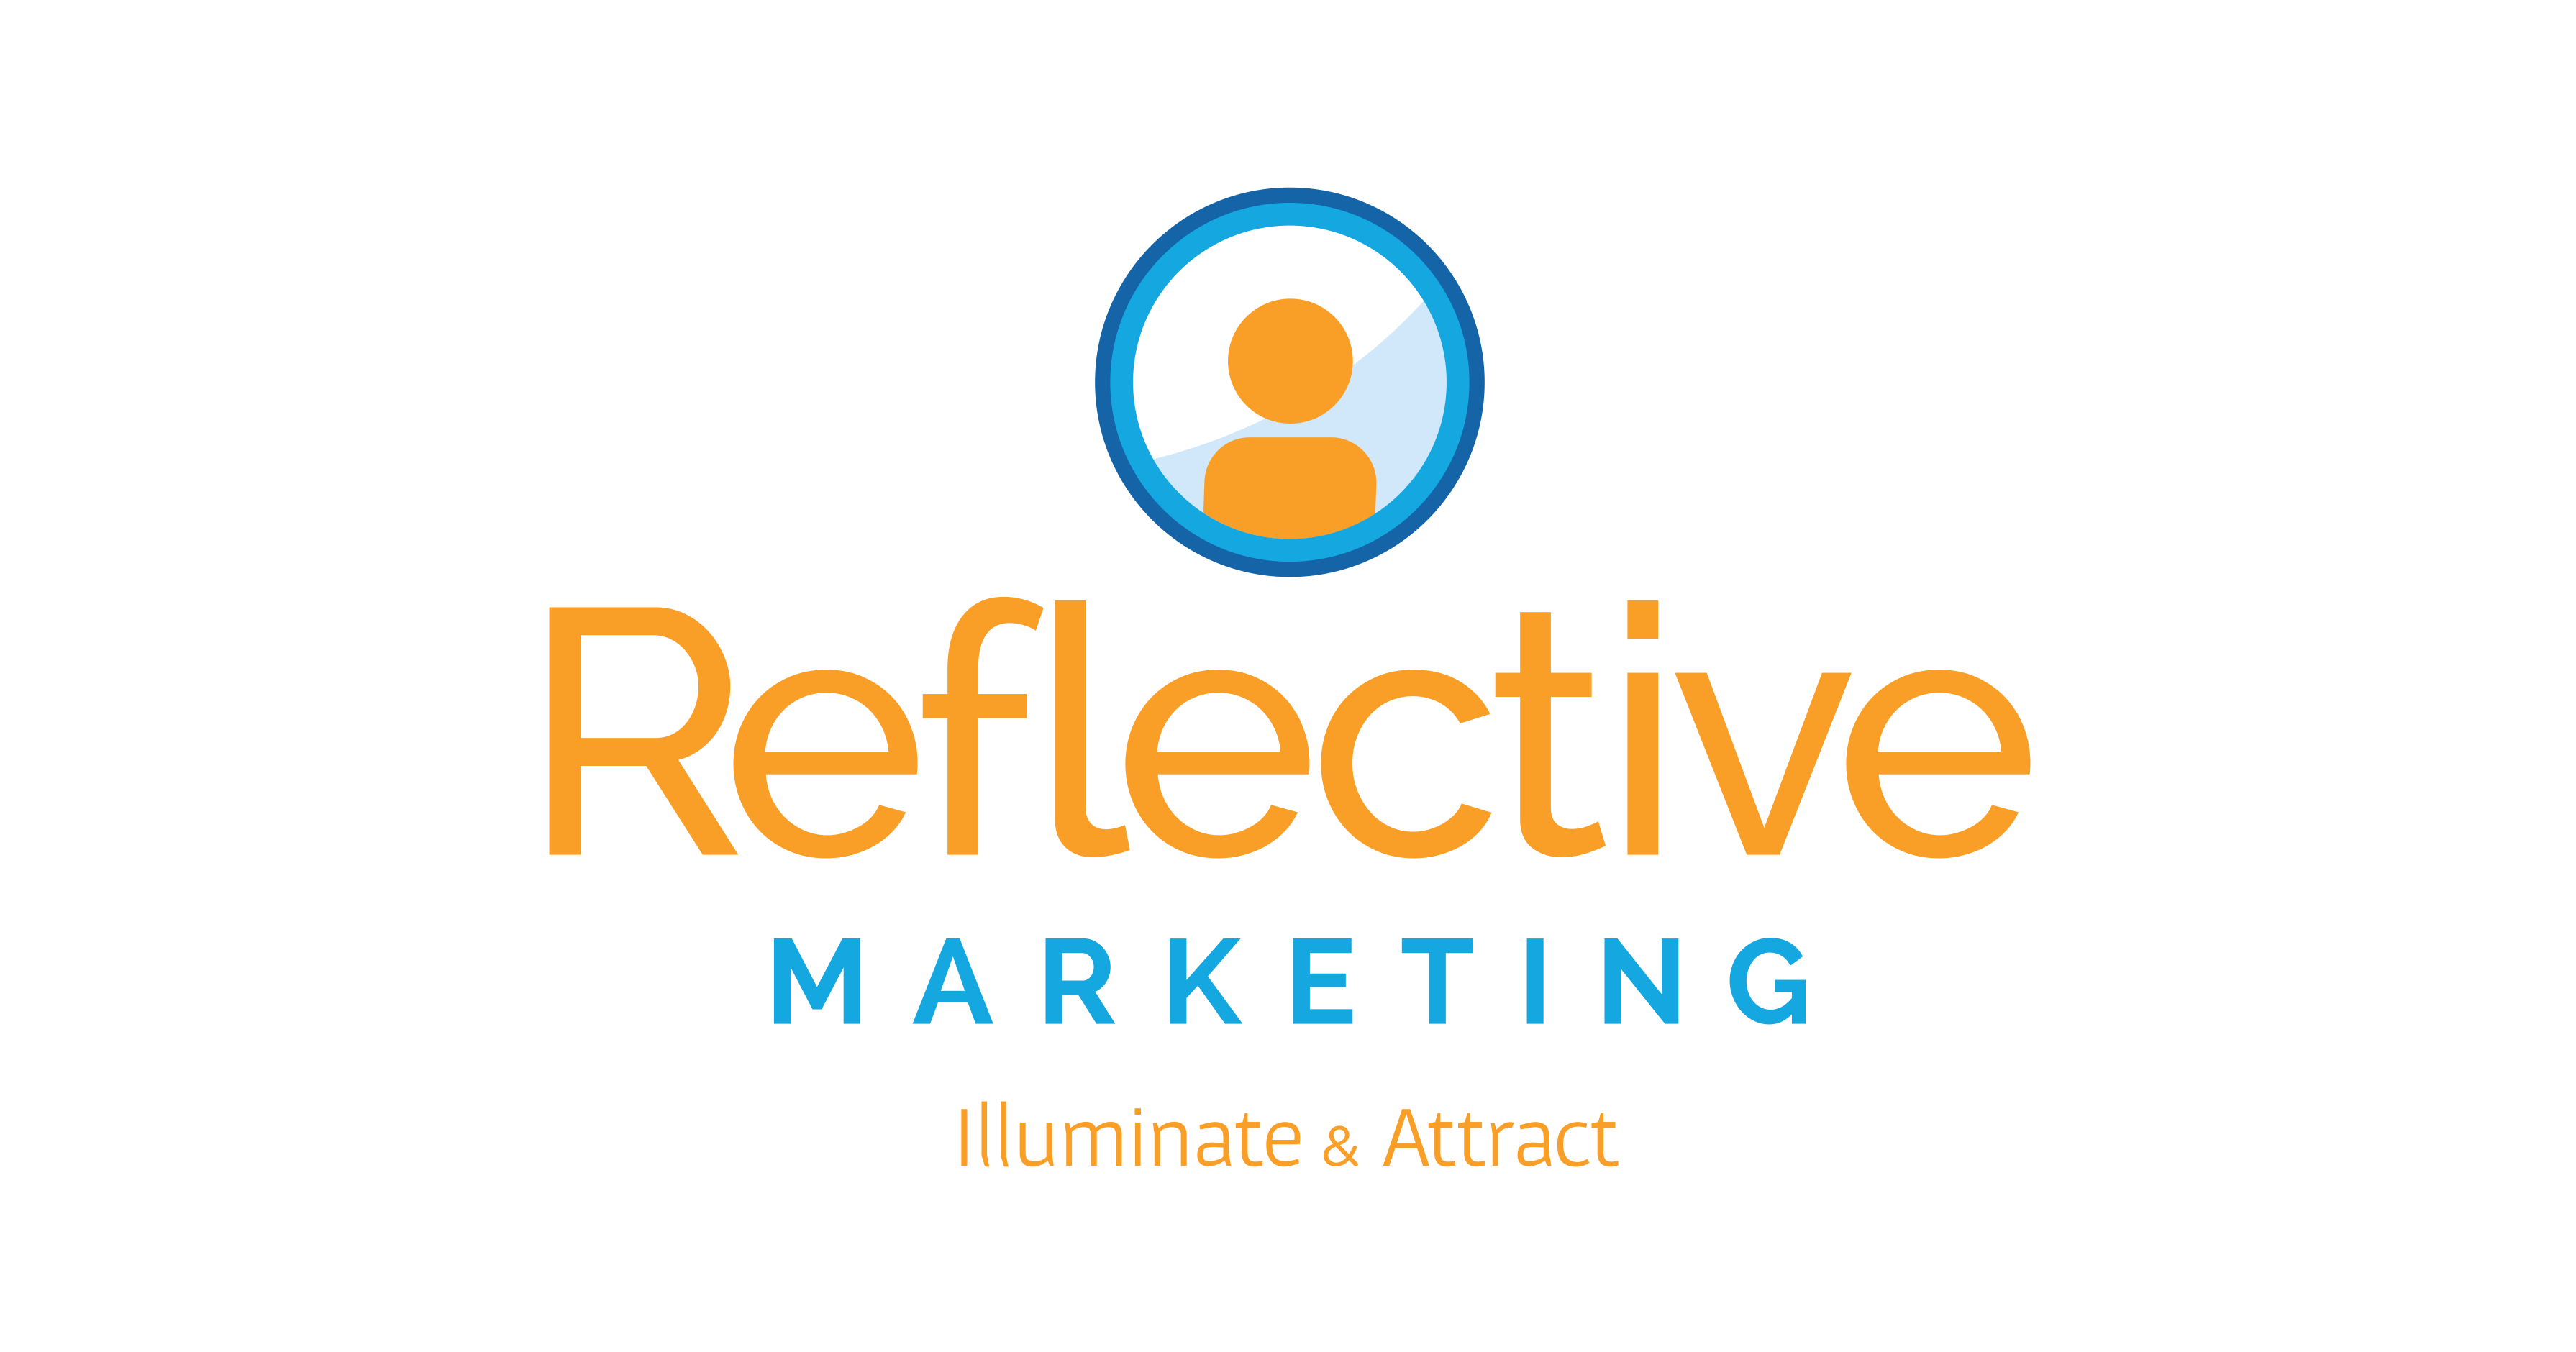 Reflective Marketing profile on Qualified.One